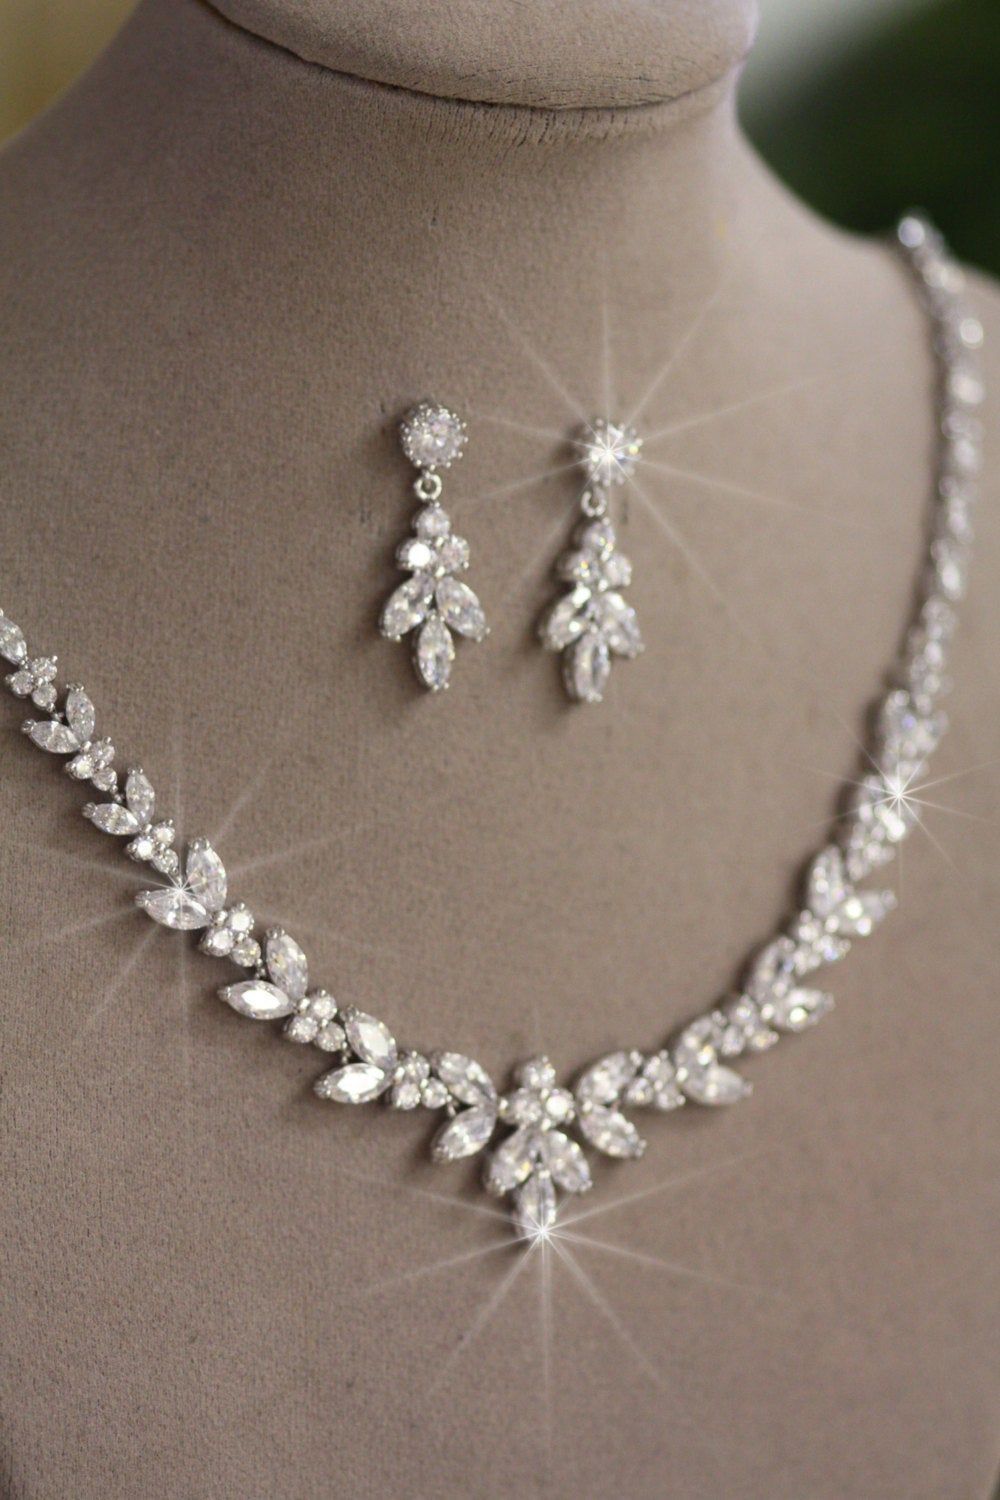 Get a beautiful look with jewelry sets